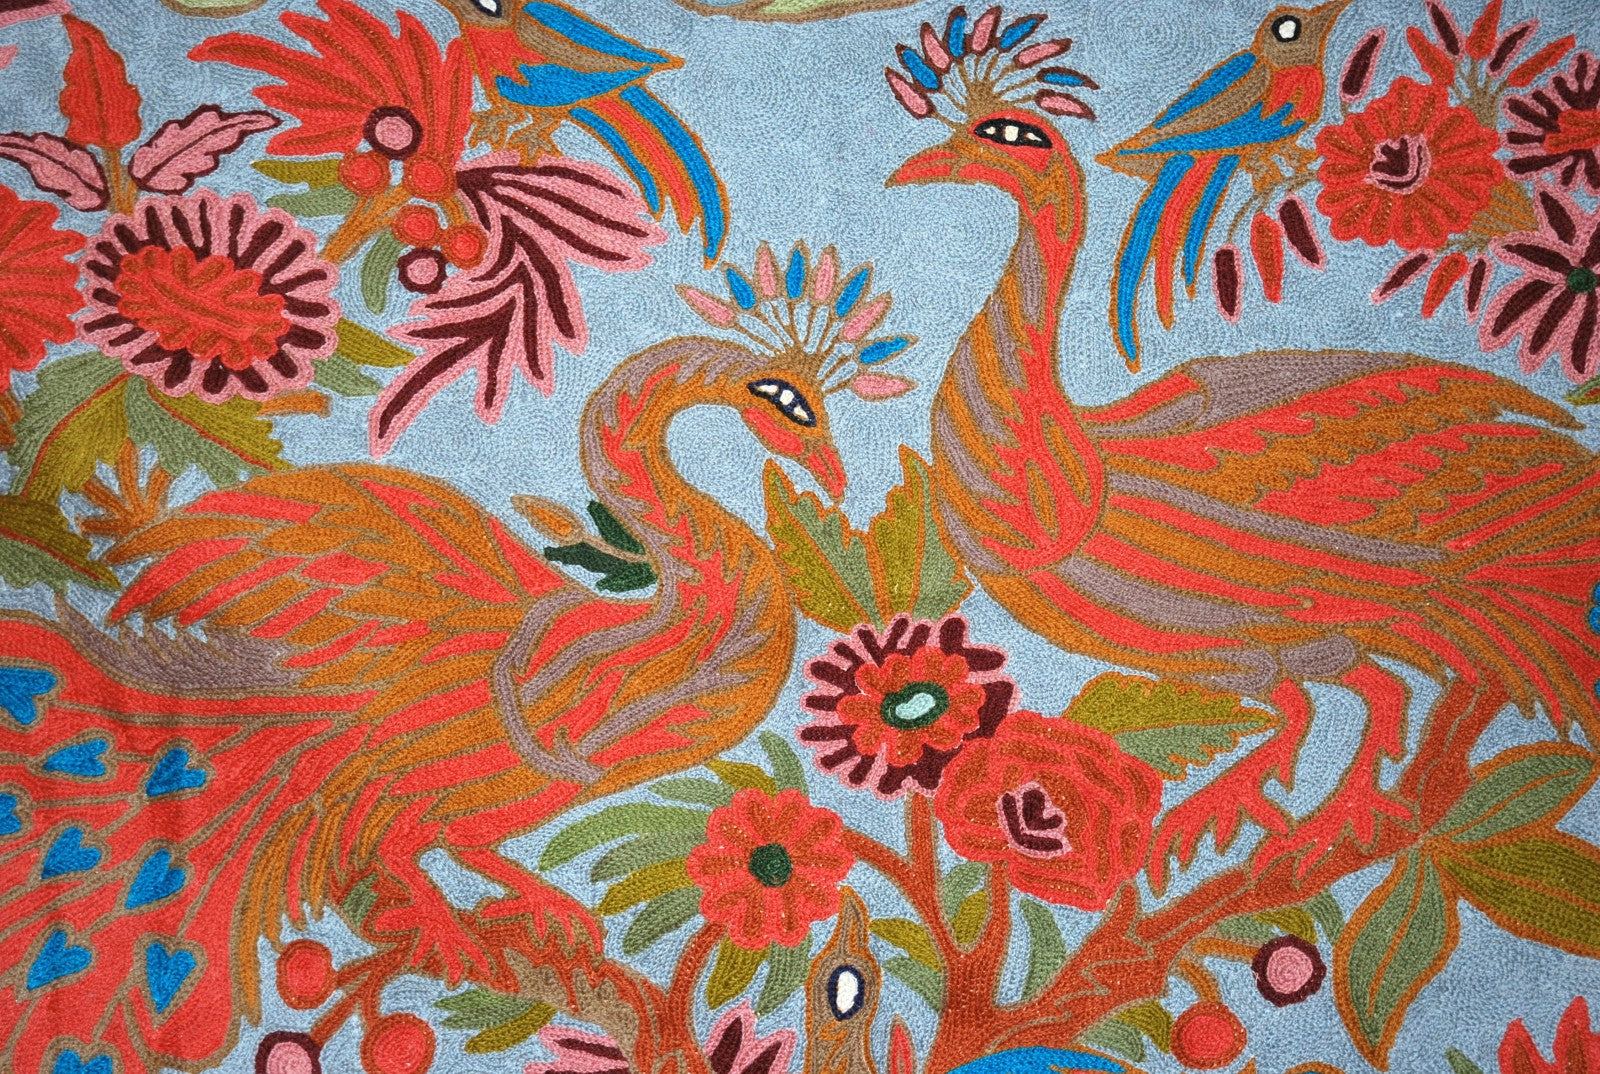 Kashmiri Wool Tapestry Area Rug "Peacocks", Multicolor Embroidery 3x5 feet #CWR15117